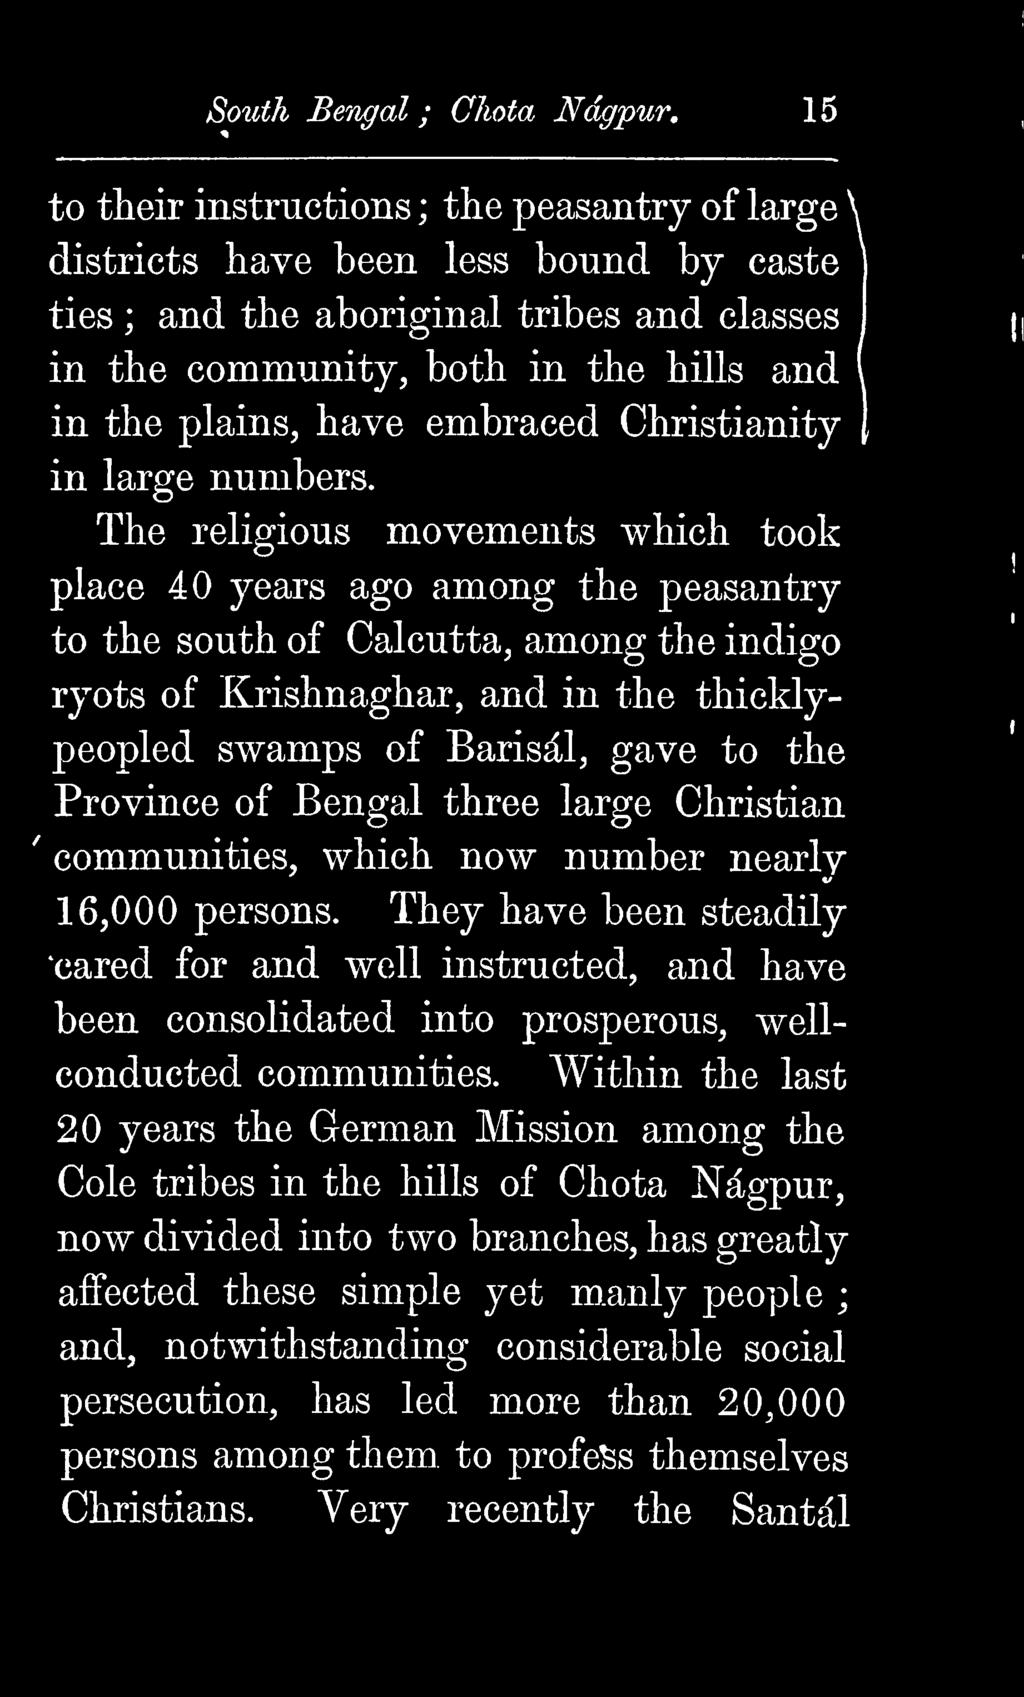 The religious movements which took place 40 years ago among the peasantry to the south of Calcutta, among the indigo ryots of Krishnaghar, and in the thicklypeopled swamps of Baris^l, gave to the